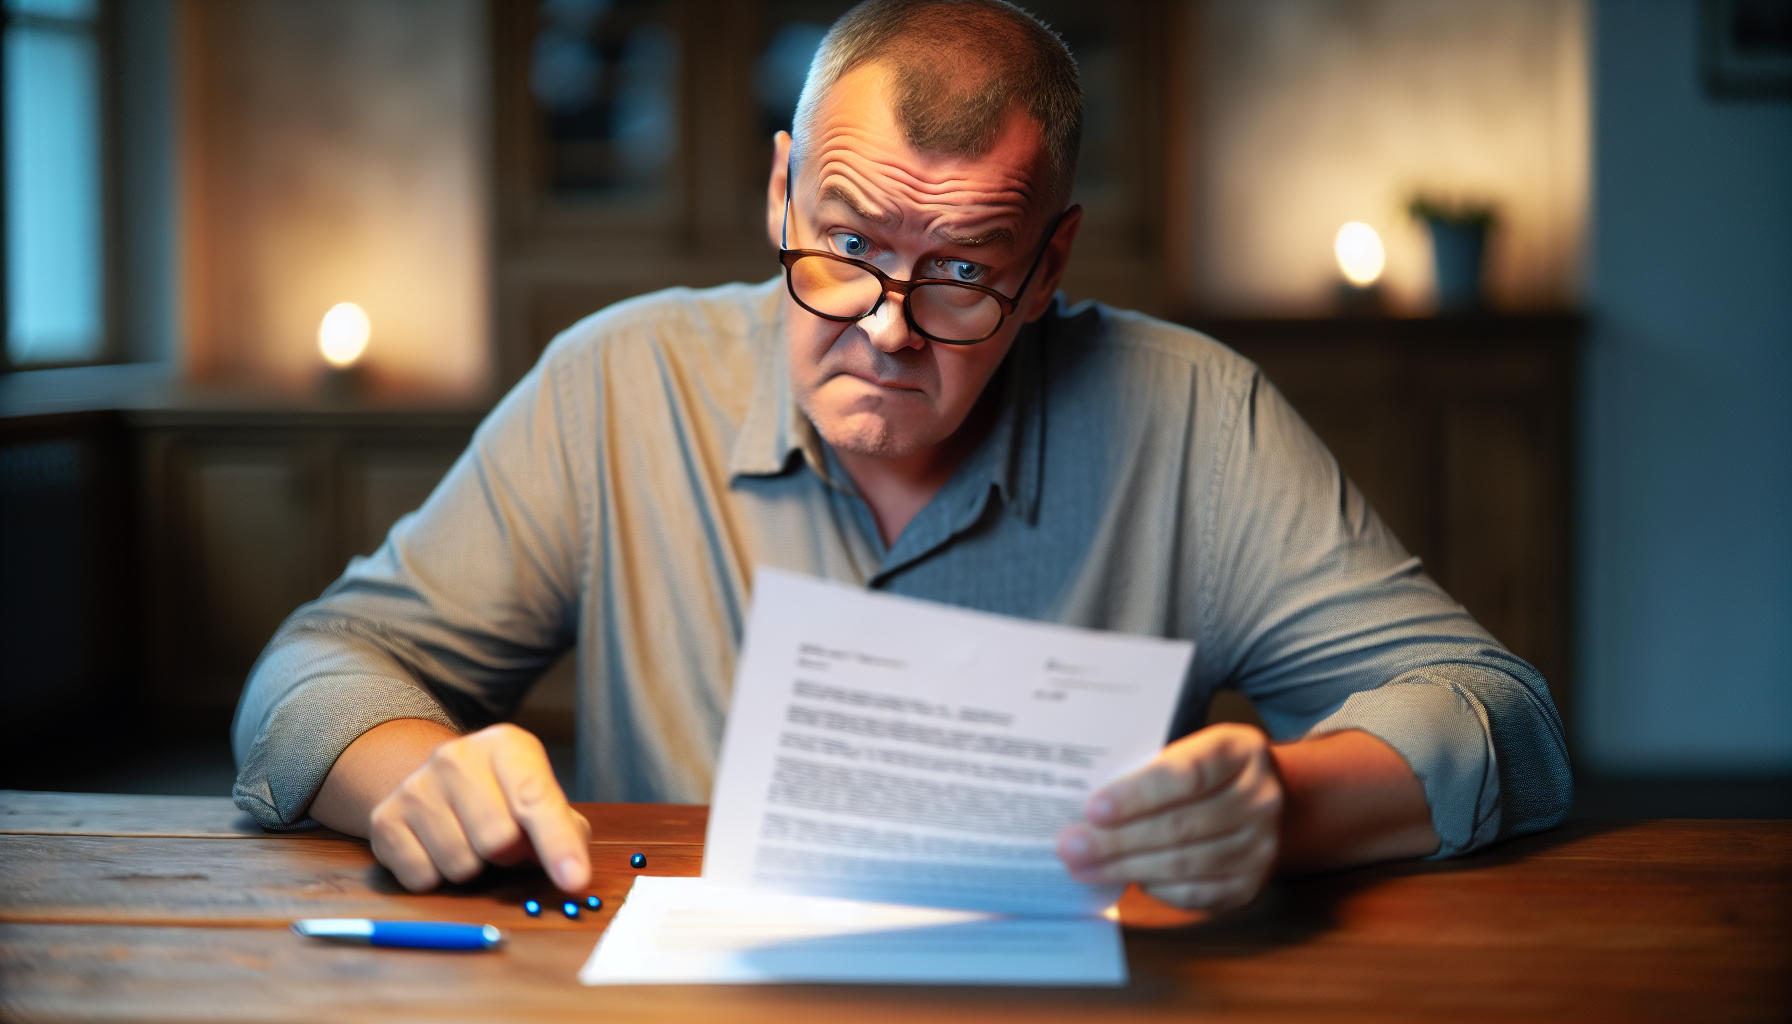 Frustrated person looking at a settlement offer letter